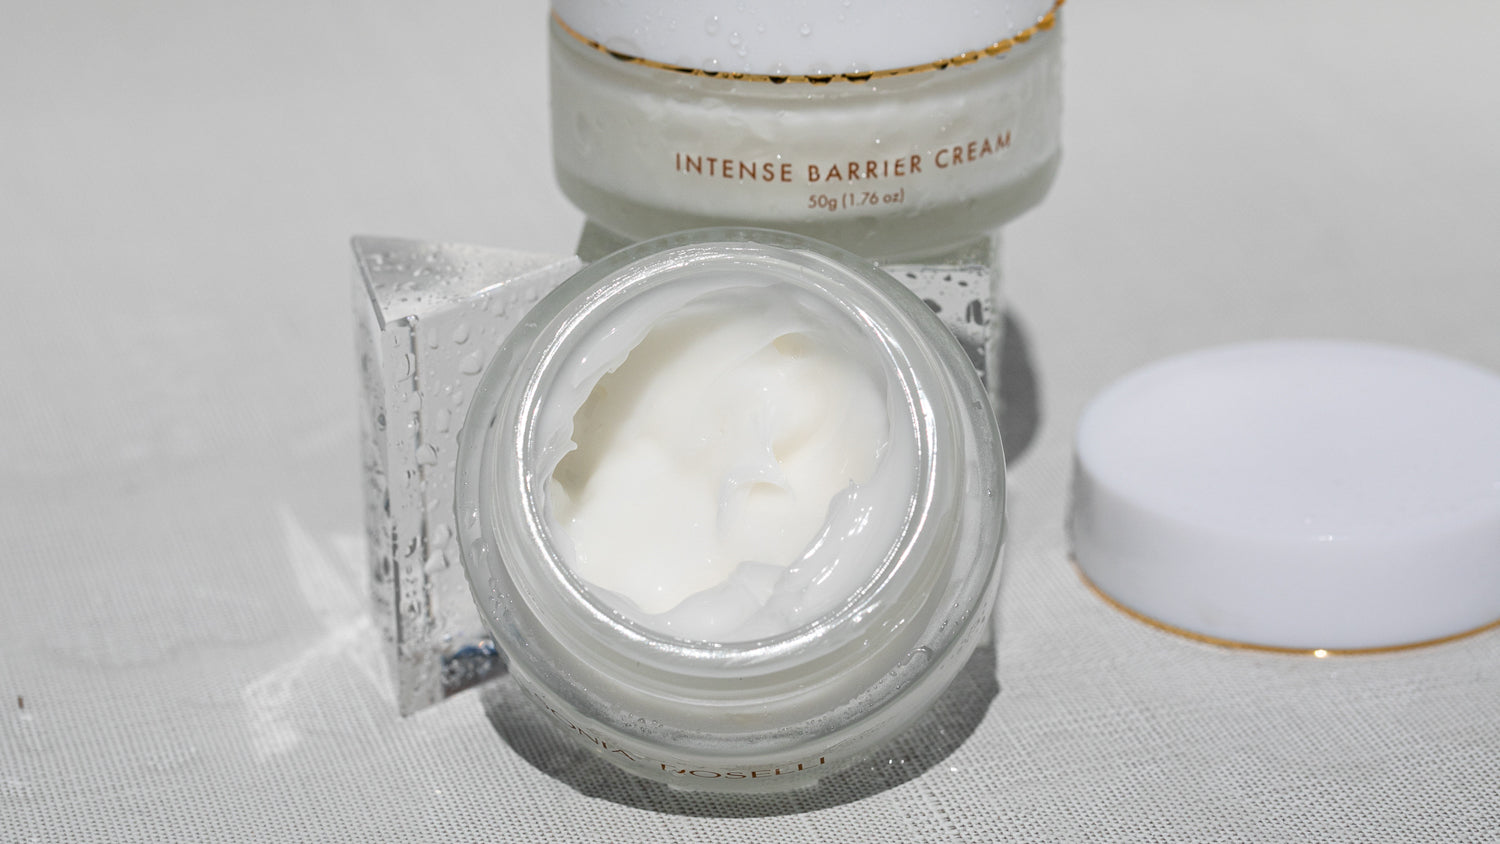 A jar of Sonia Roselli Beauty's Intense Barrier Cream takes the spotlight in this product photo. Its sleek packaging and pristine appearance convey the promise of powerful and protective skincare, offering a nourishing shield for your skin